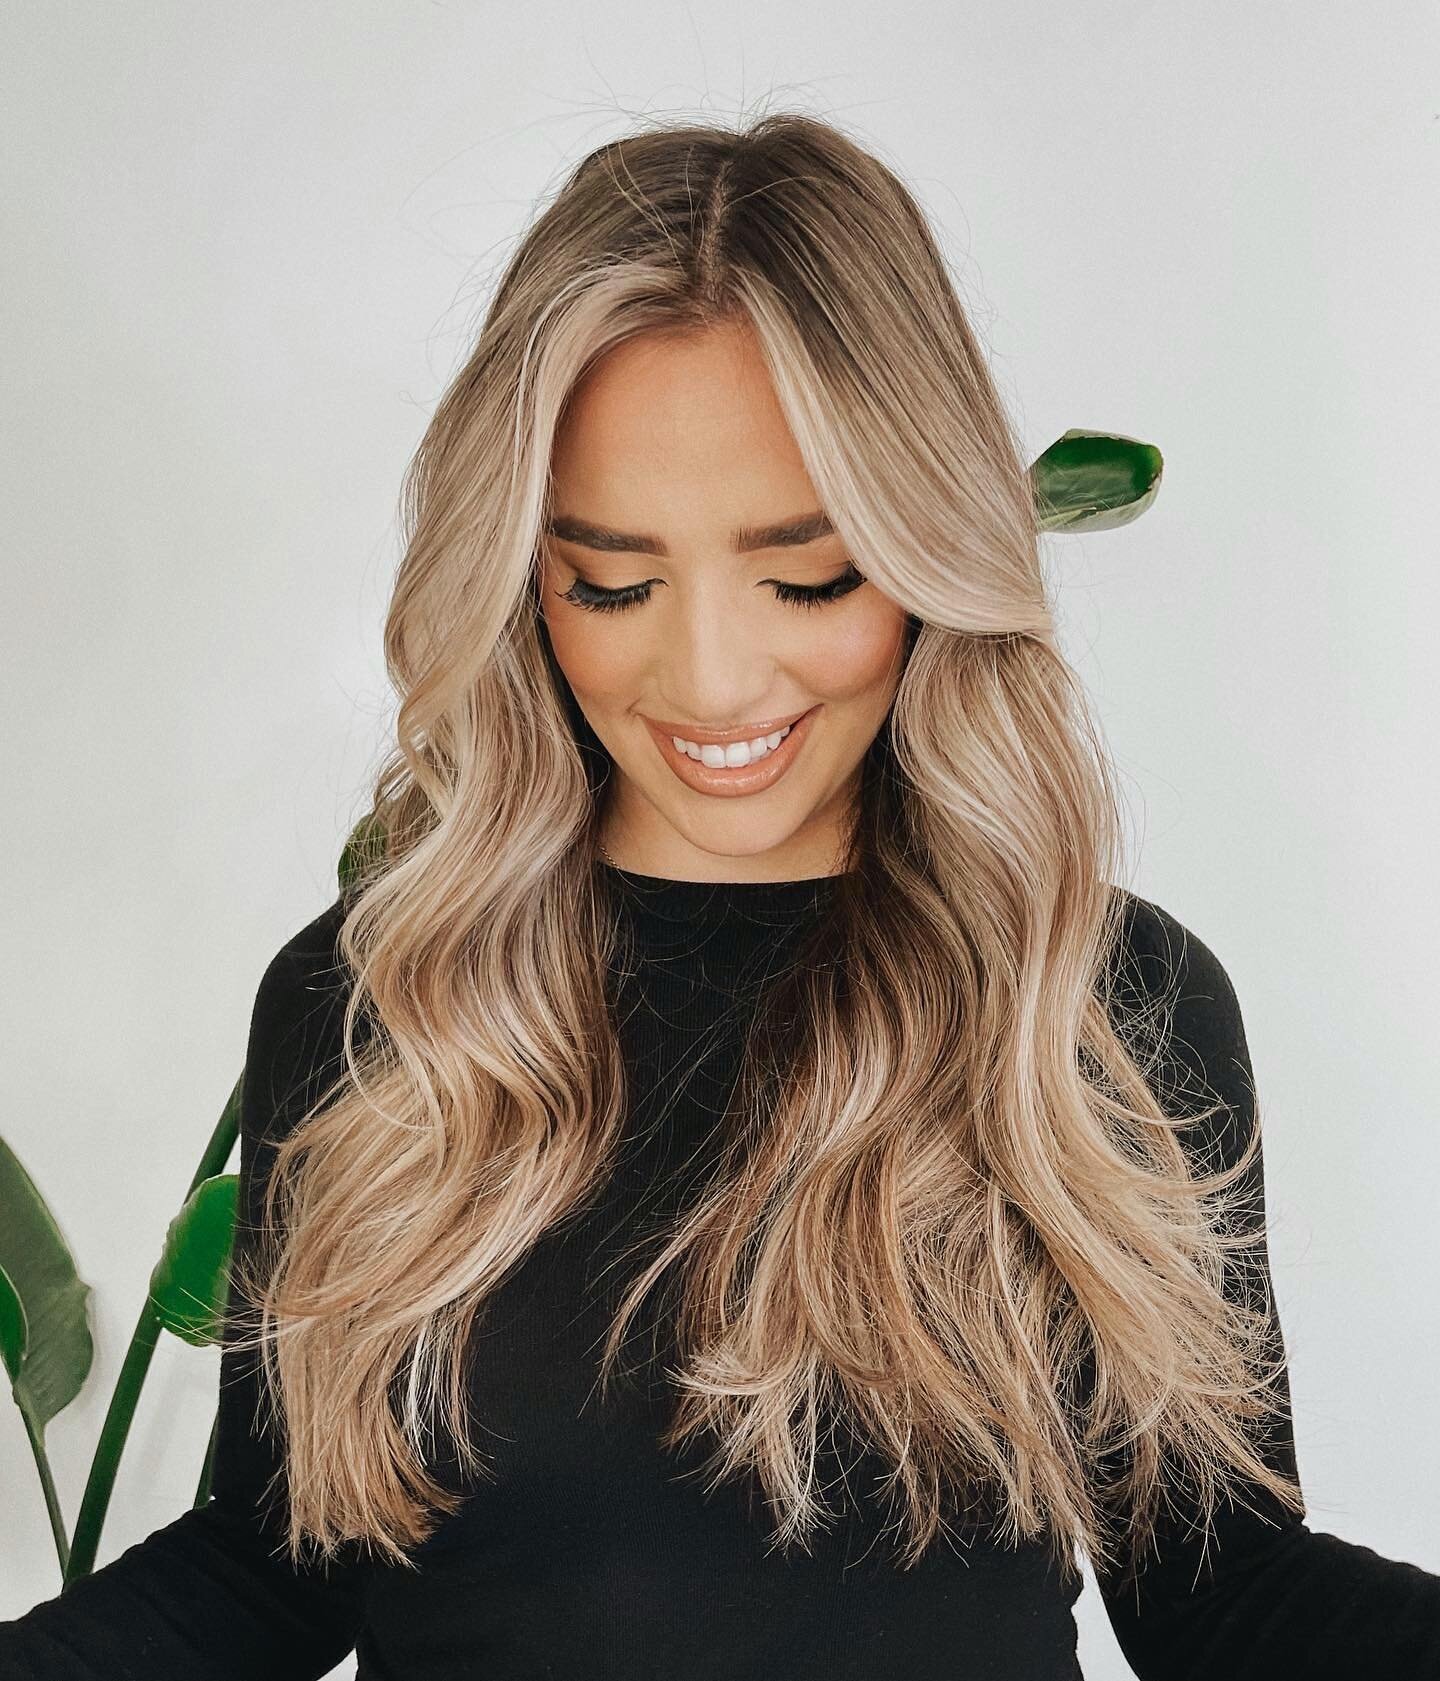 One last appreciation post for this hair because @biancajcox is going to be switching it up this weekend! #Hairthrone @hairthrone #blonde #newyorkhair #hairinspo #hairstyle #balayage #hairgoals #haircolor ✨